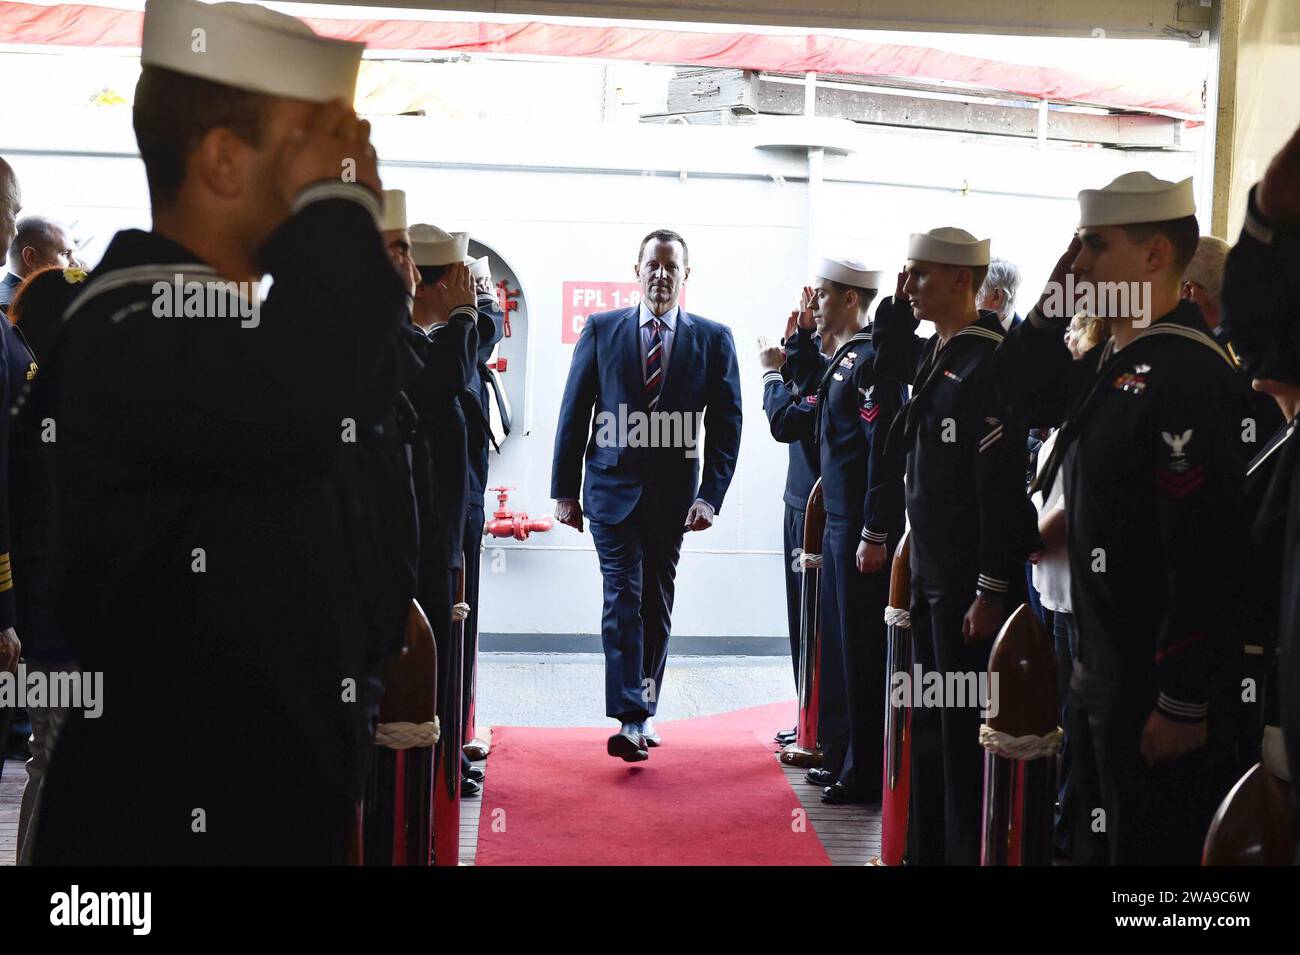 US military forces. 180615XT273-1745 KIEL, Germany (June 15, 2018) Sailors render honors to Richard Grenell, U.S. Ambassador to Germany, during a reception aboard the Blue Ridge-class command and control ship USS Mount Whitney (LCC 20) June 15, 2018, in Kiel, Germany, for Kiel Week. Mount Whitney, forward-deployed to Gaeta, Italy, operates with a combined crew of U.S. Navy Sailors and Military Sealift Command civil service mariners. (U.S. Navy photo by Mass Communication Specialist 1st Class Justin Stumberg/Released) Stock Photo